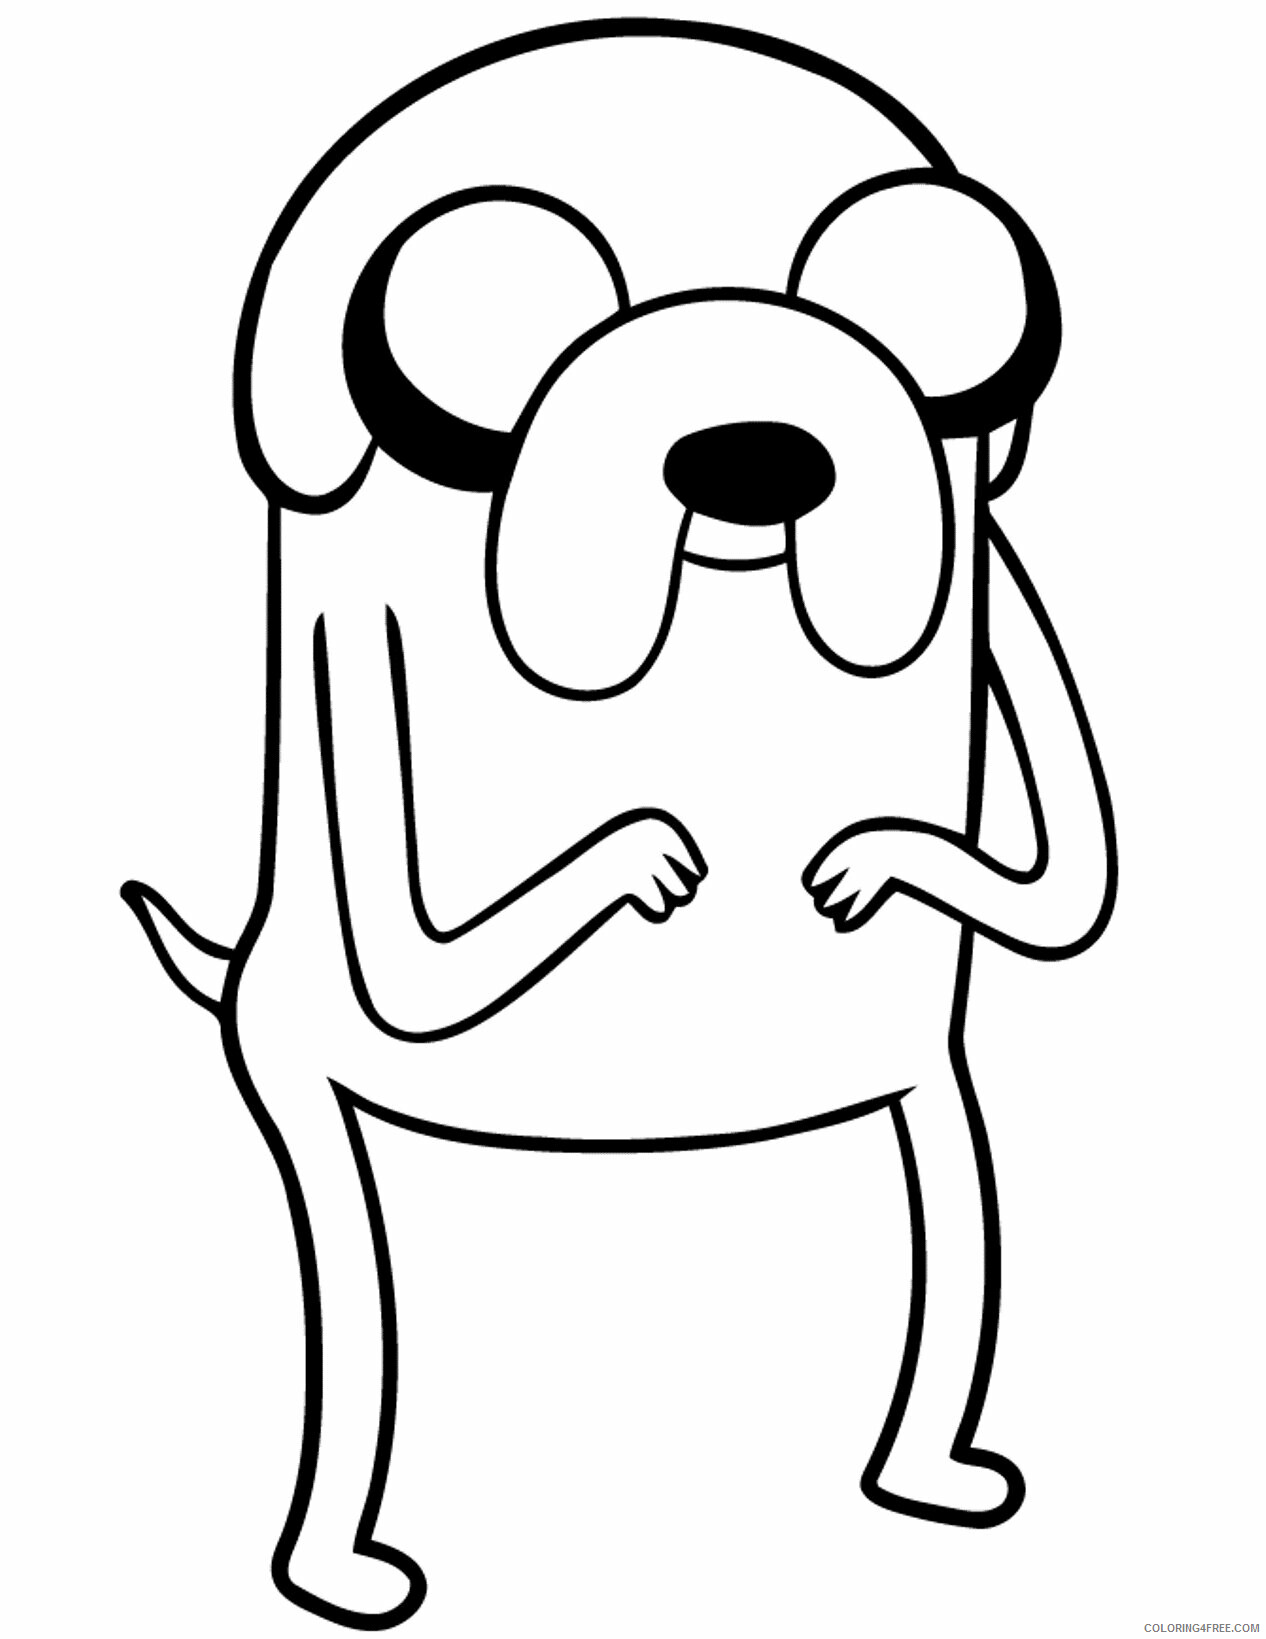 Adventure Time Coloring Pages Online Printable Sheets Jake The Dog 2021 a 2656 Coloring4free